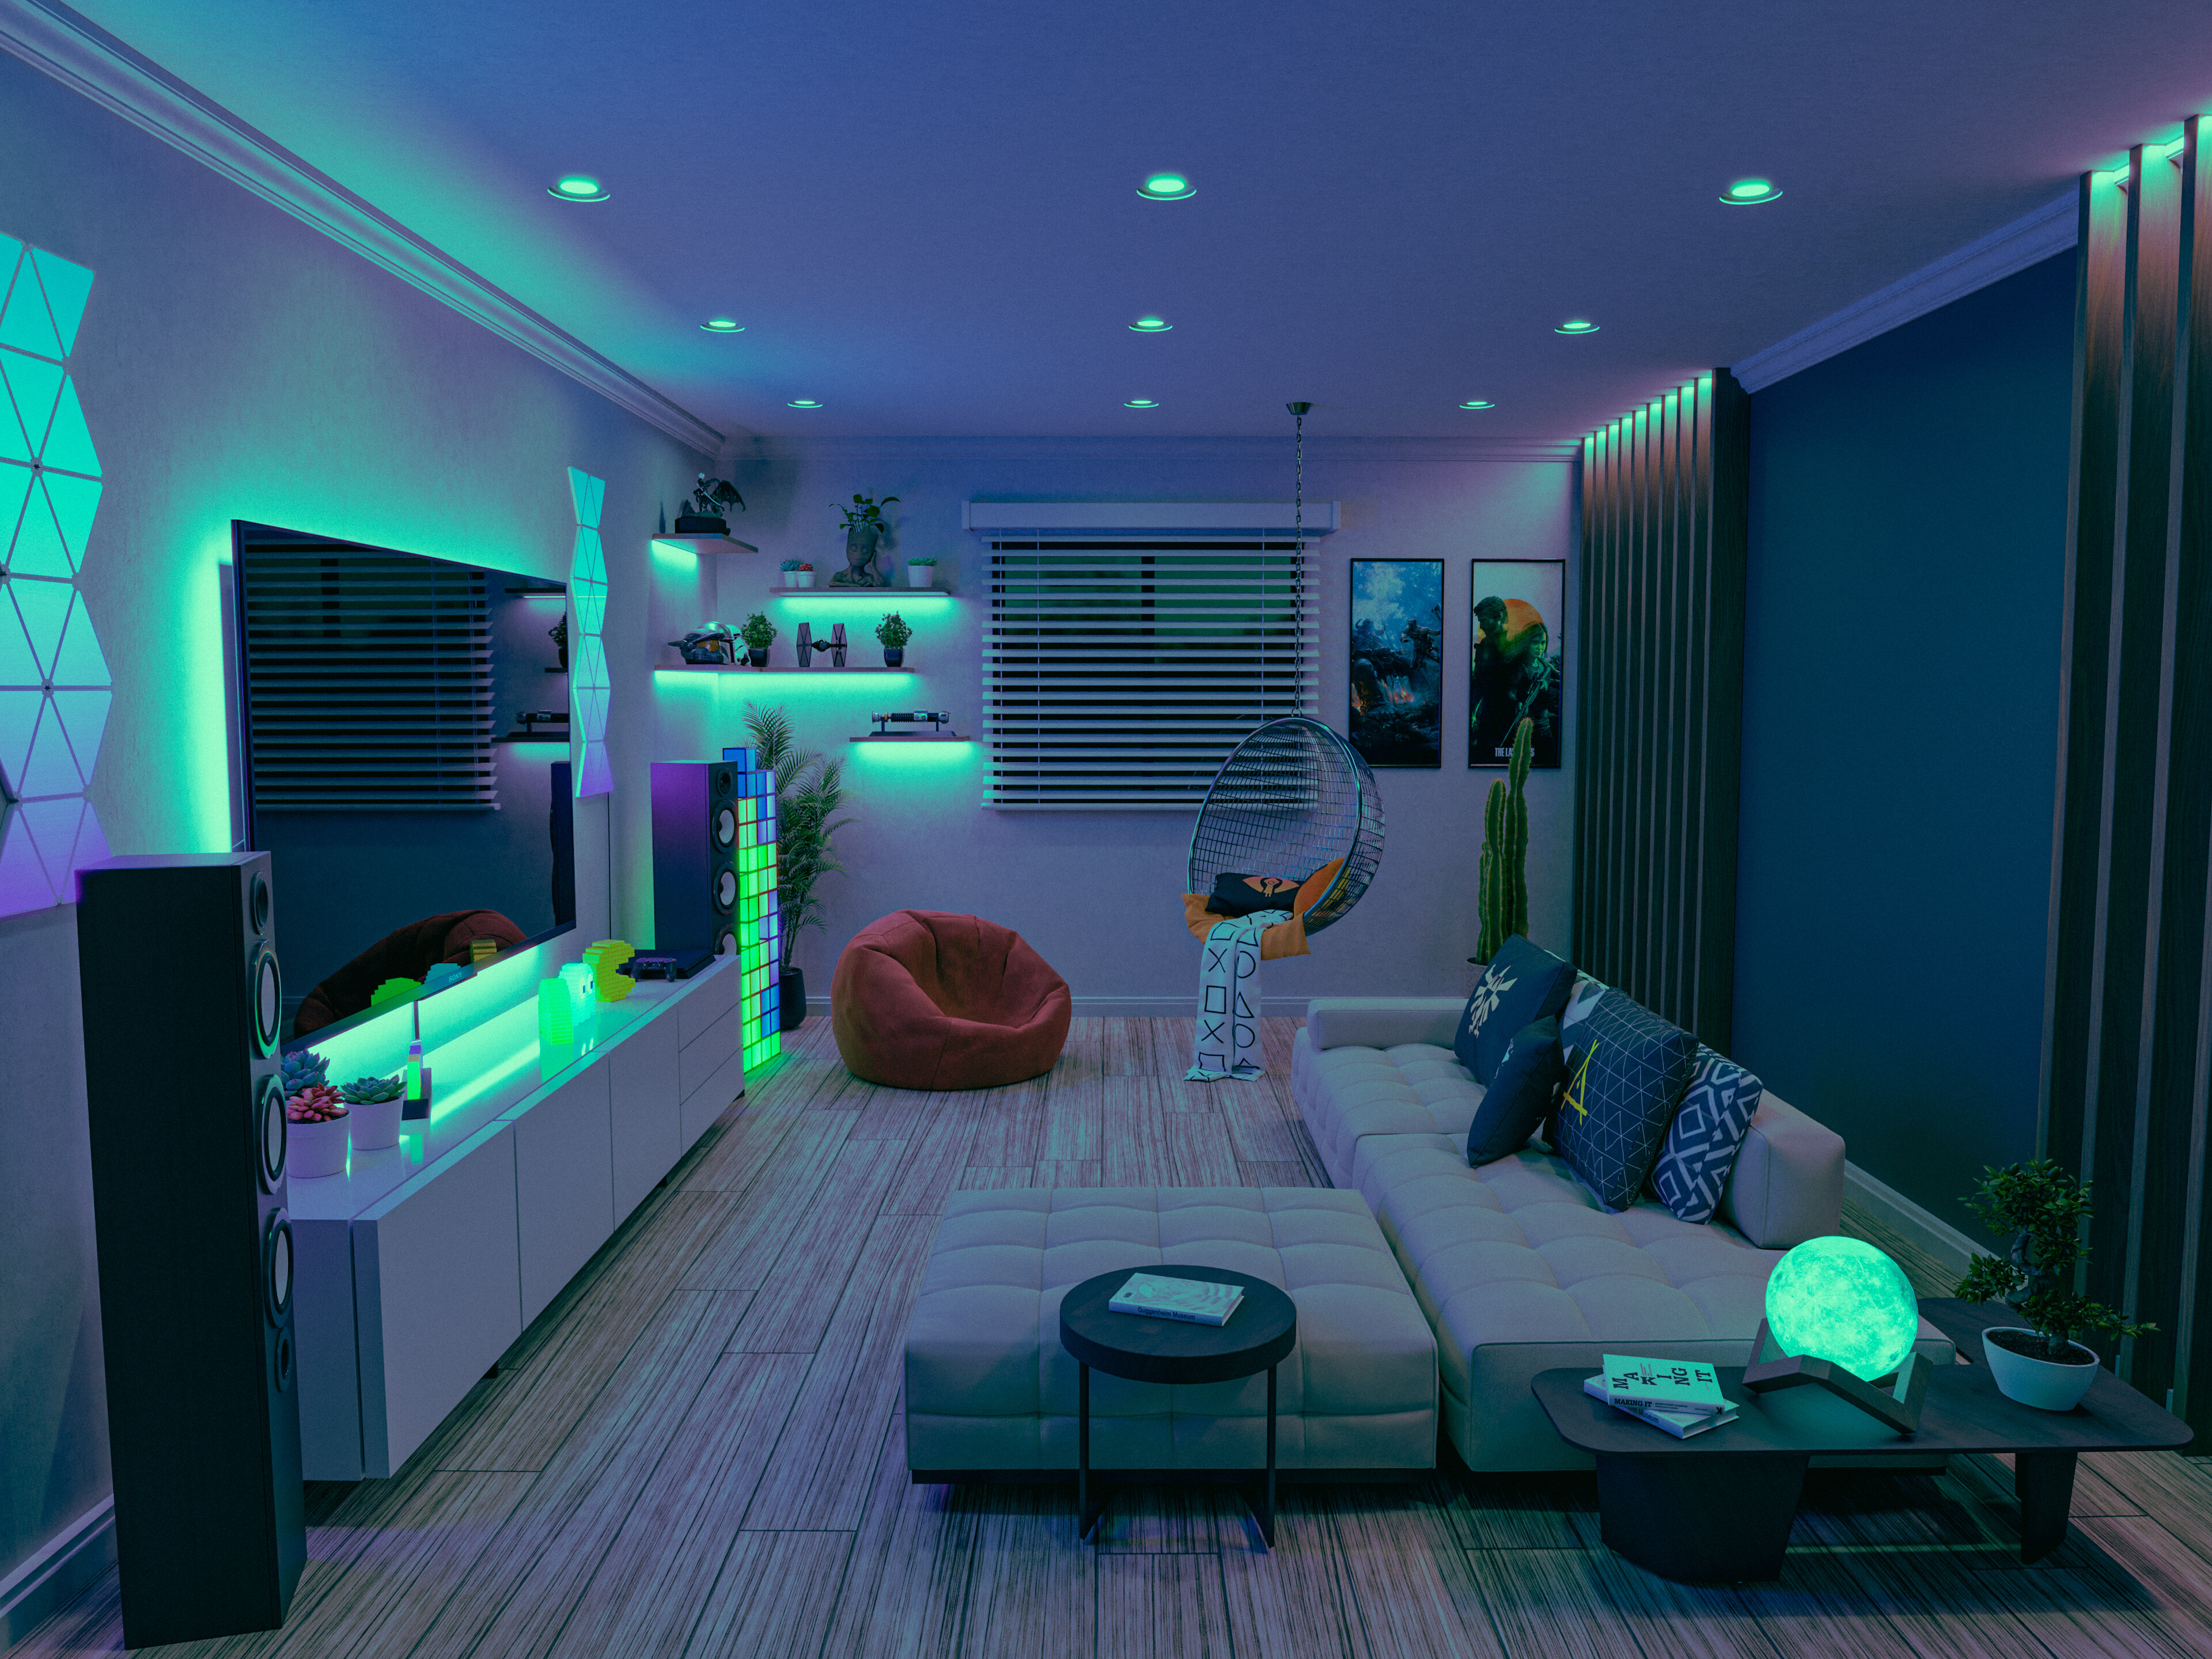 Gaming Room Visualization - Finished Projects - Blender Artists